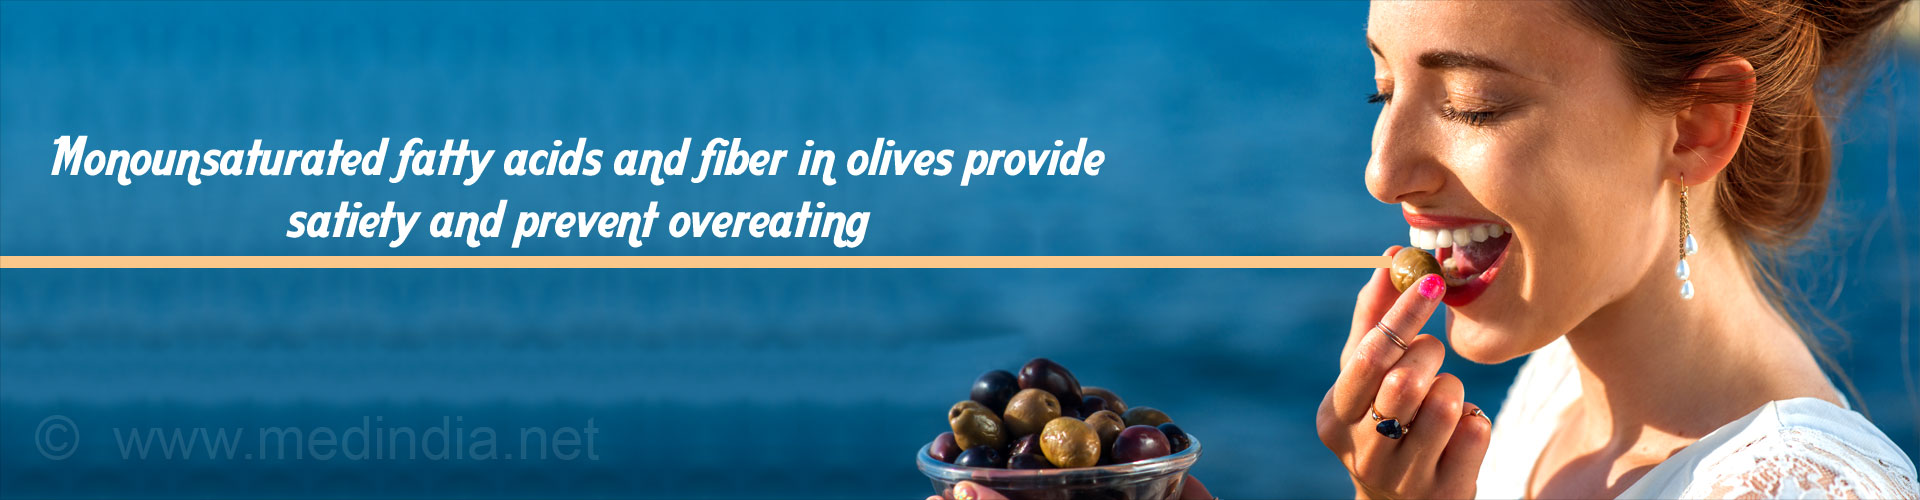 Monosaturated fatty acids and fiber in olives provide satiety and prevent overeating